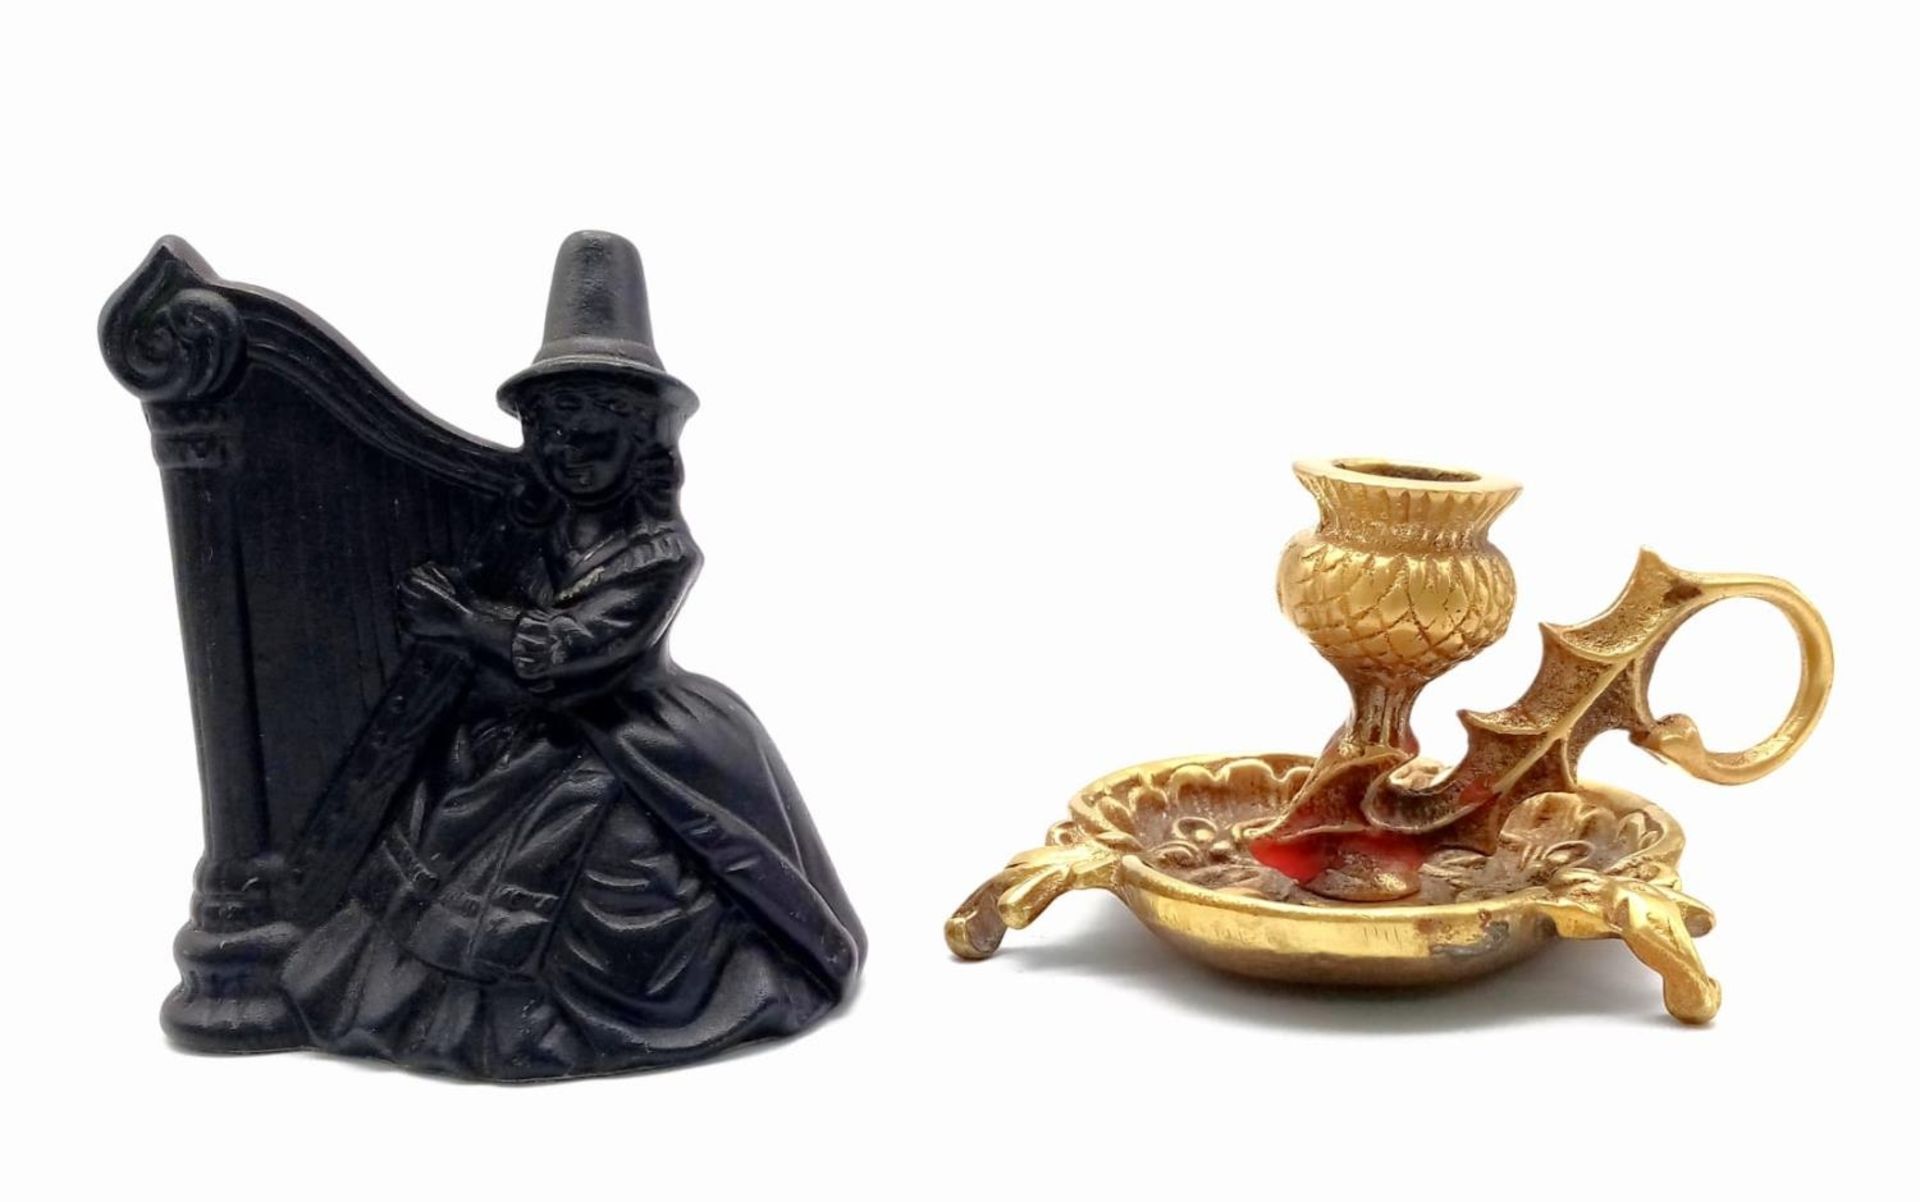 A Vintage Small Brass Candle Holder and a Coal Lady Figurine - 10cm.